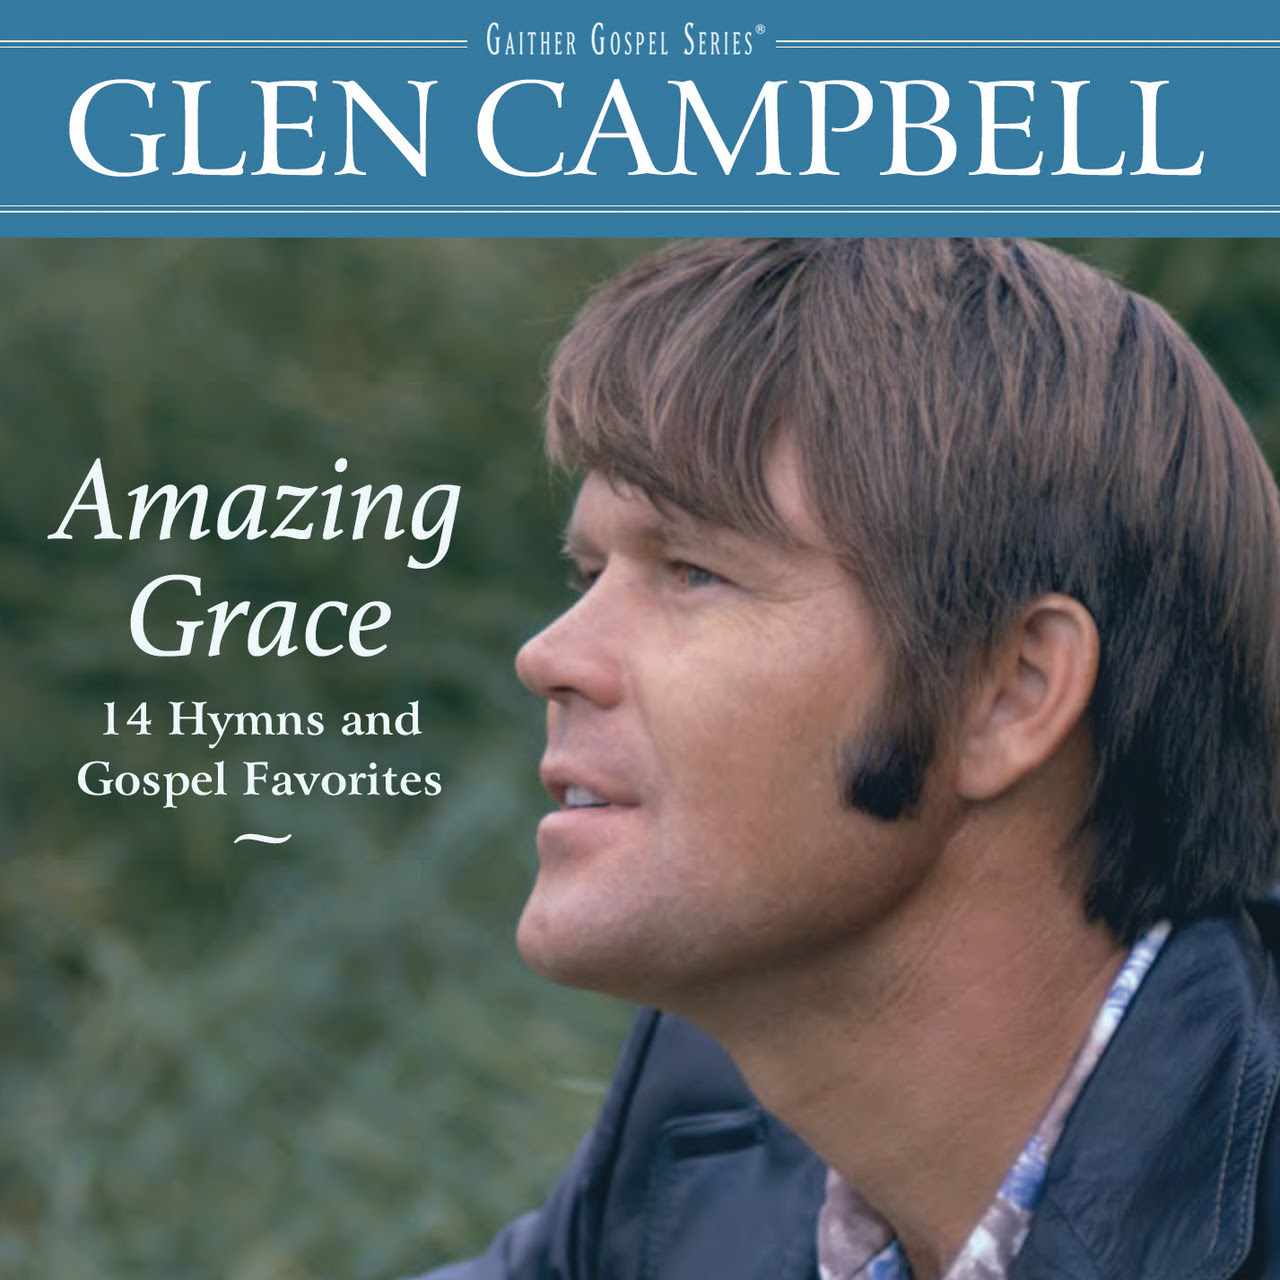 Gaither Music Group Pays Tribute to the Legacy of Music Icon Glen Campbell with Release of Gospel Collection